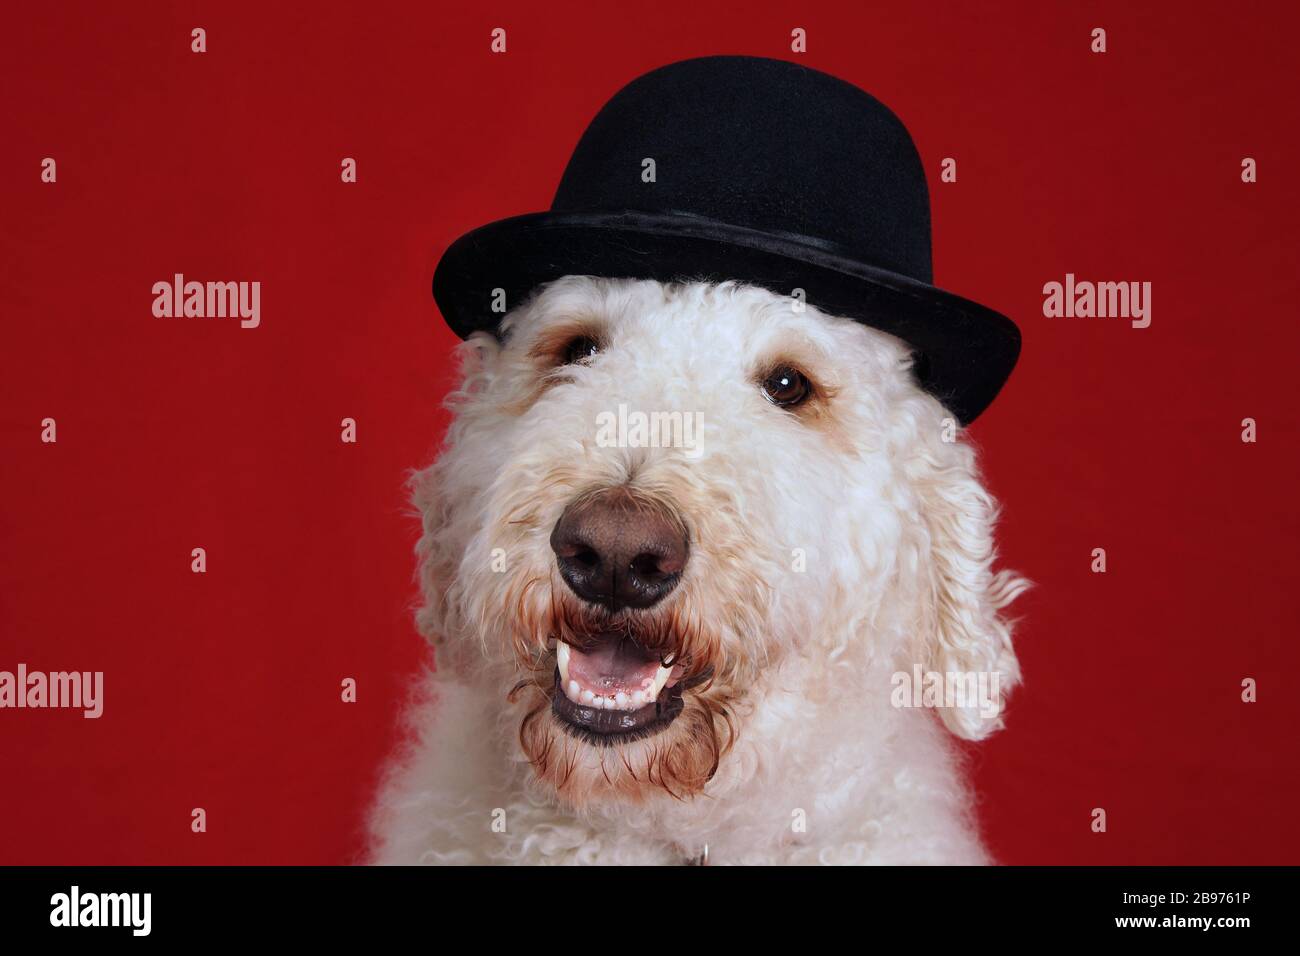 Cute goldendoodle dog with bowler hat portrait over red Stock Photo